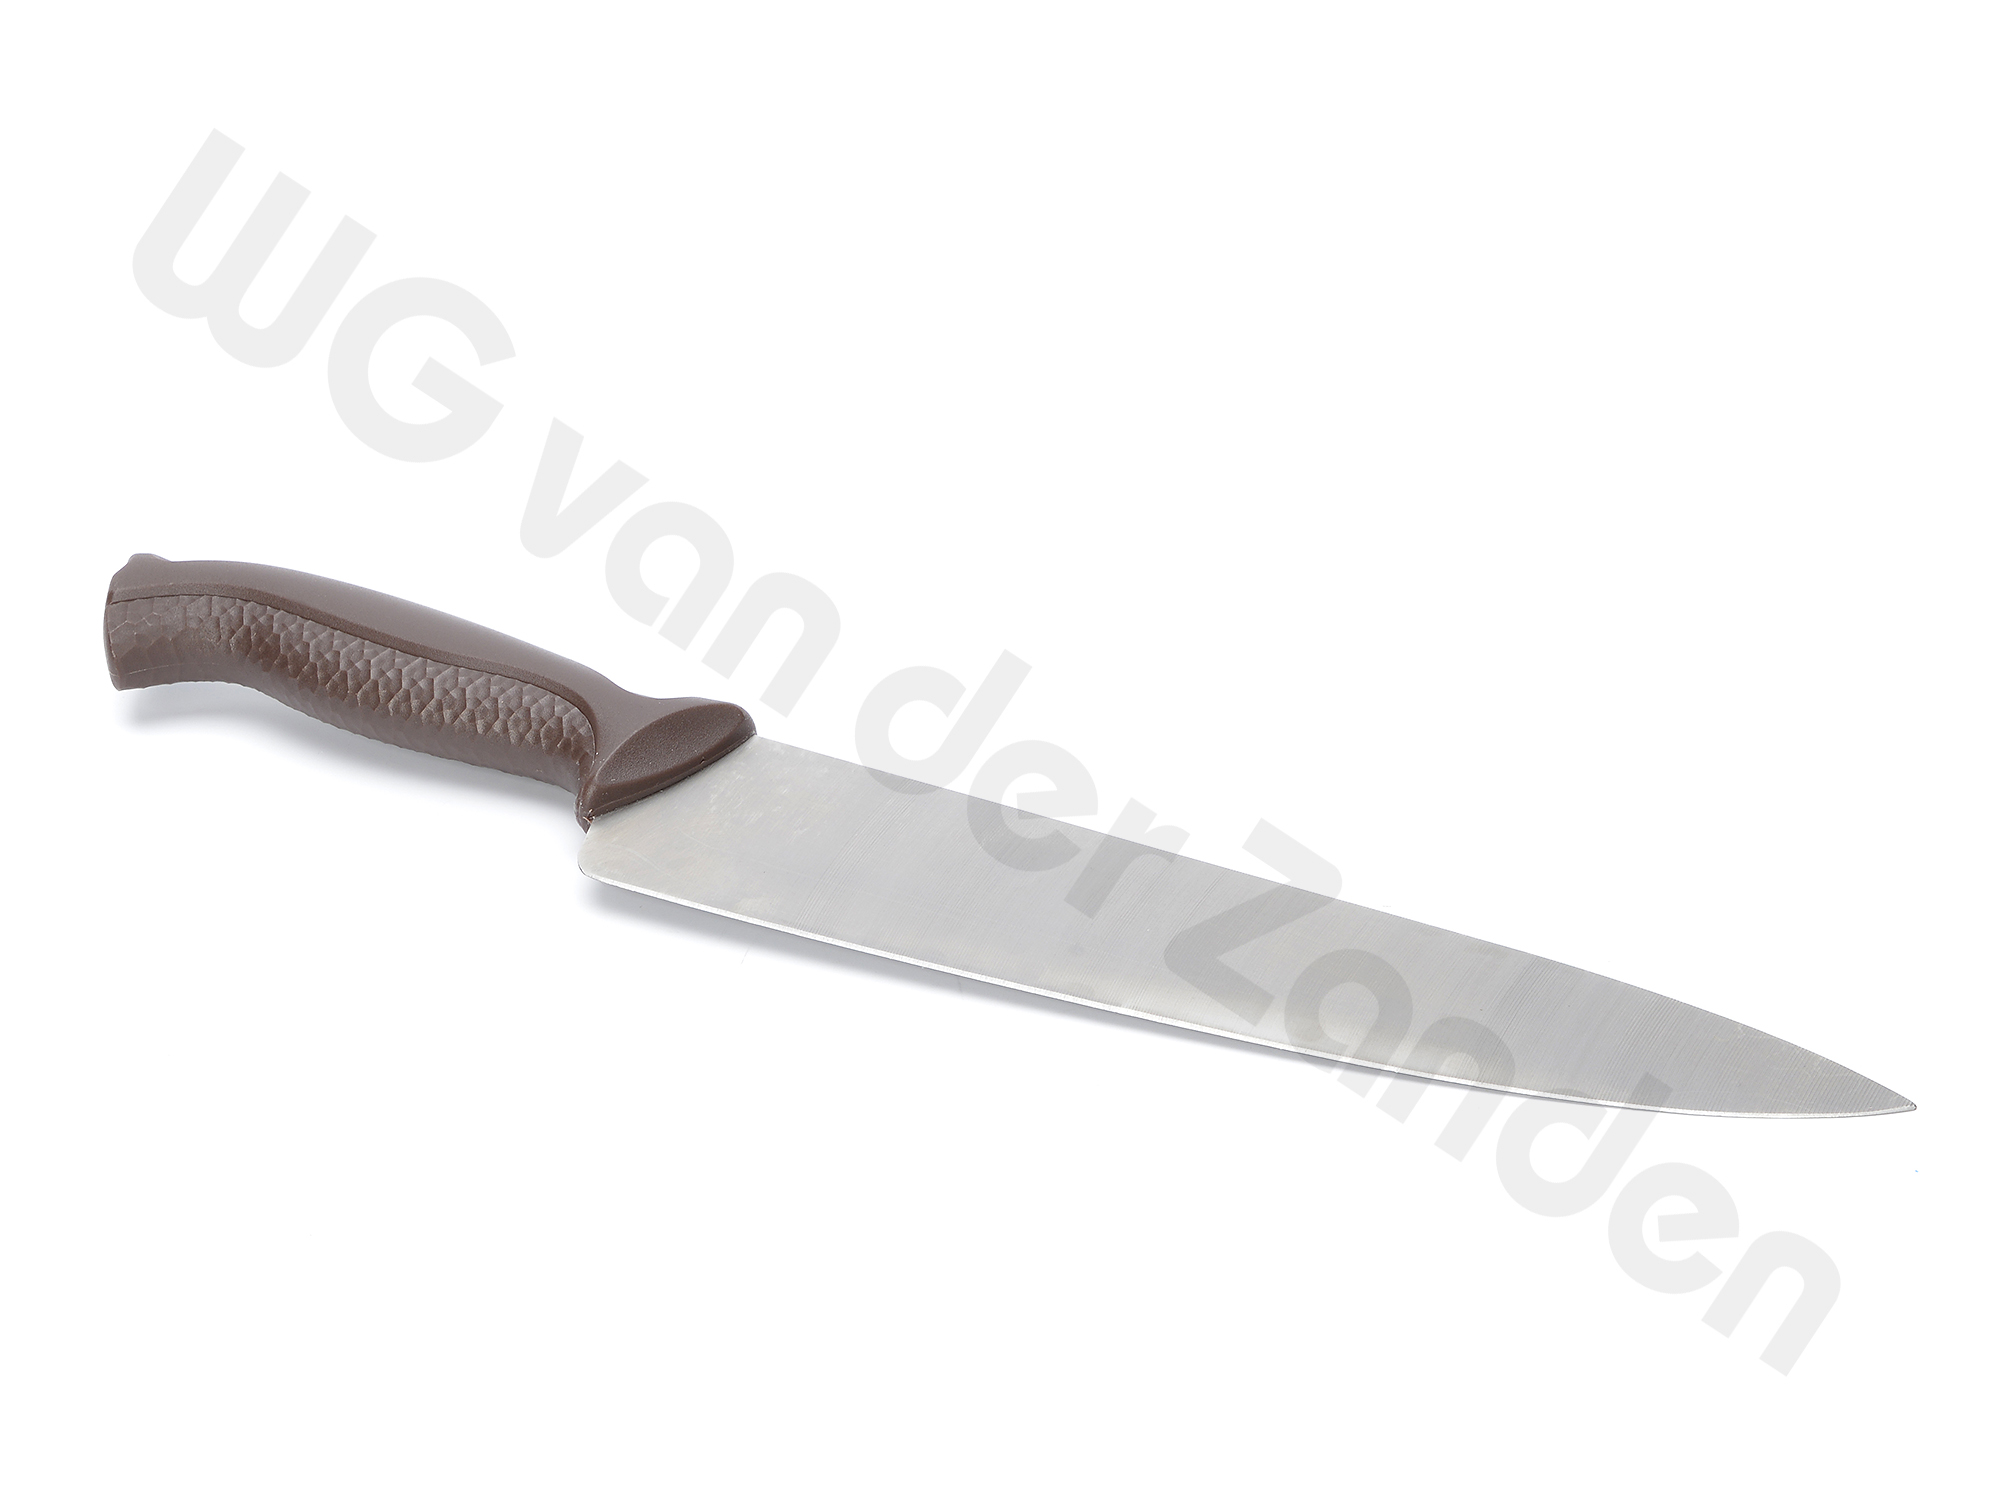 551541 CHEFS KNIFE 18CM BROWN HANDLE